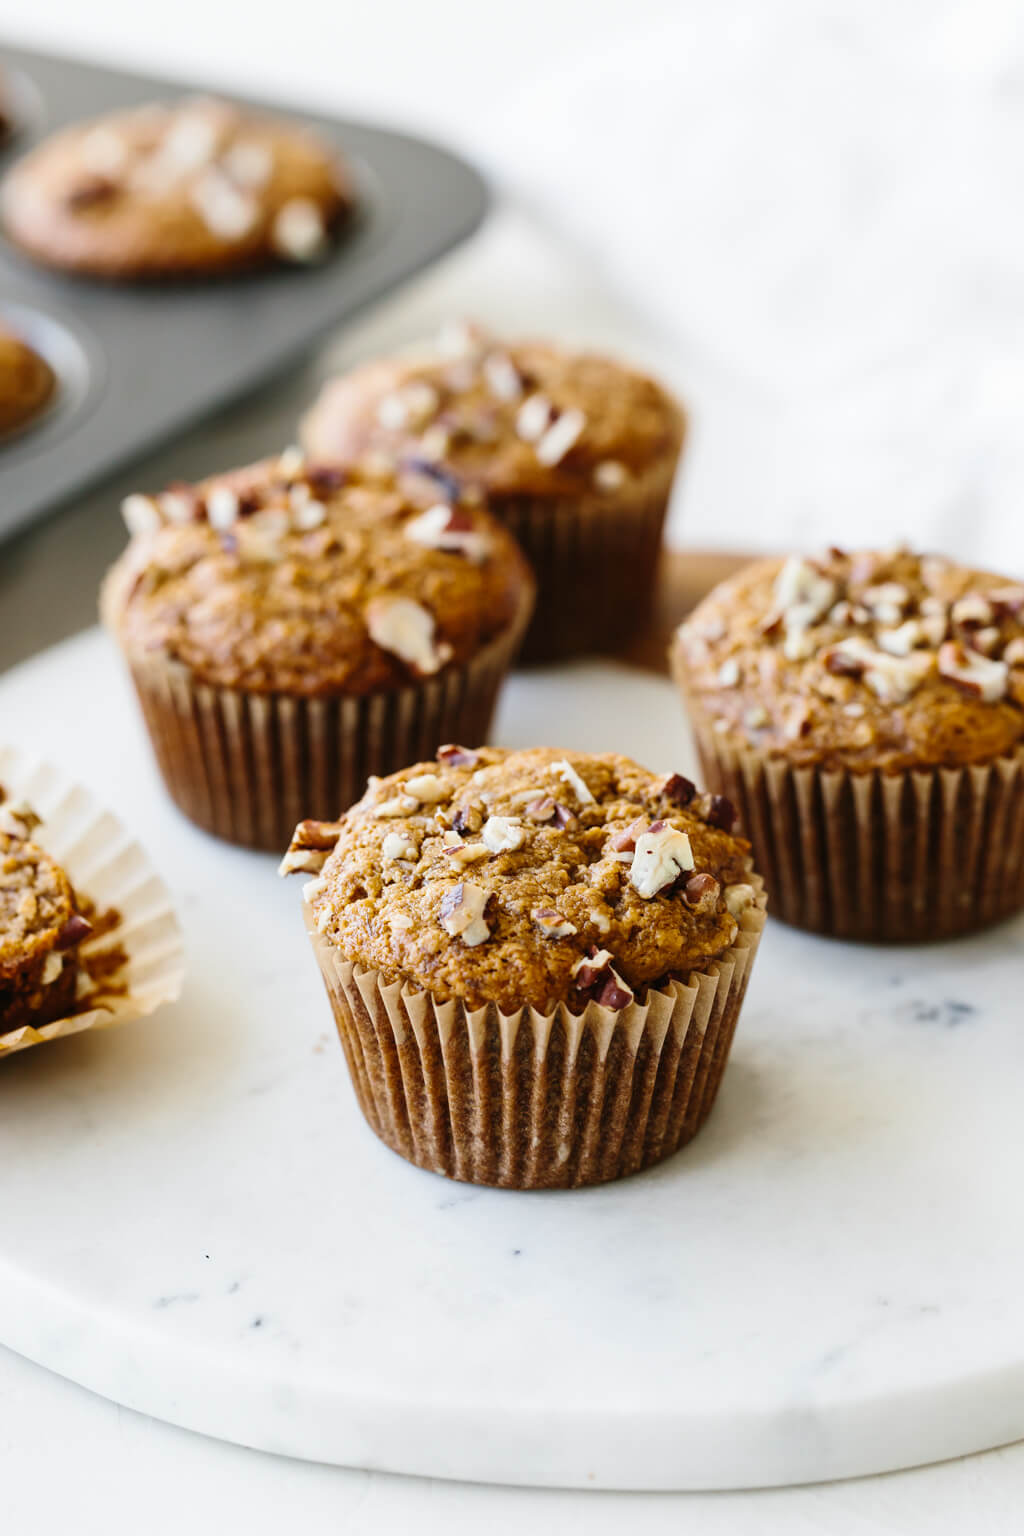 Paleo banana nut muffins are easy to make, delicious and gluten-free and dairy-free. The perfect healthy breakfast recipe and snack!